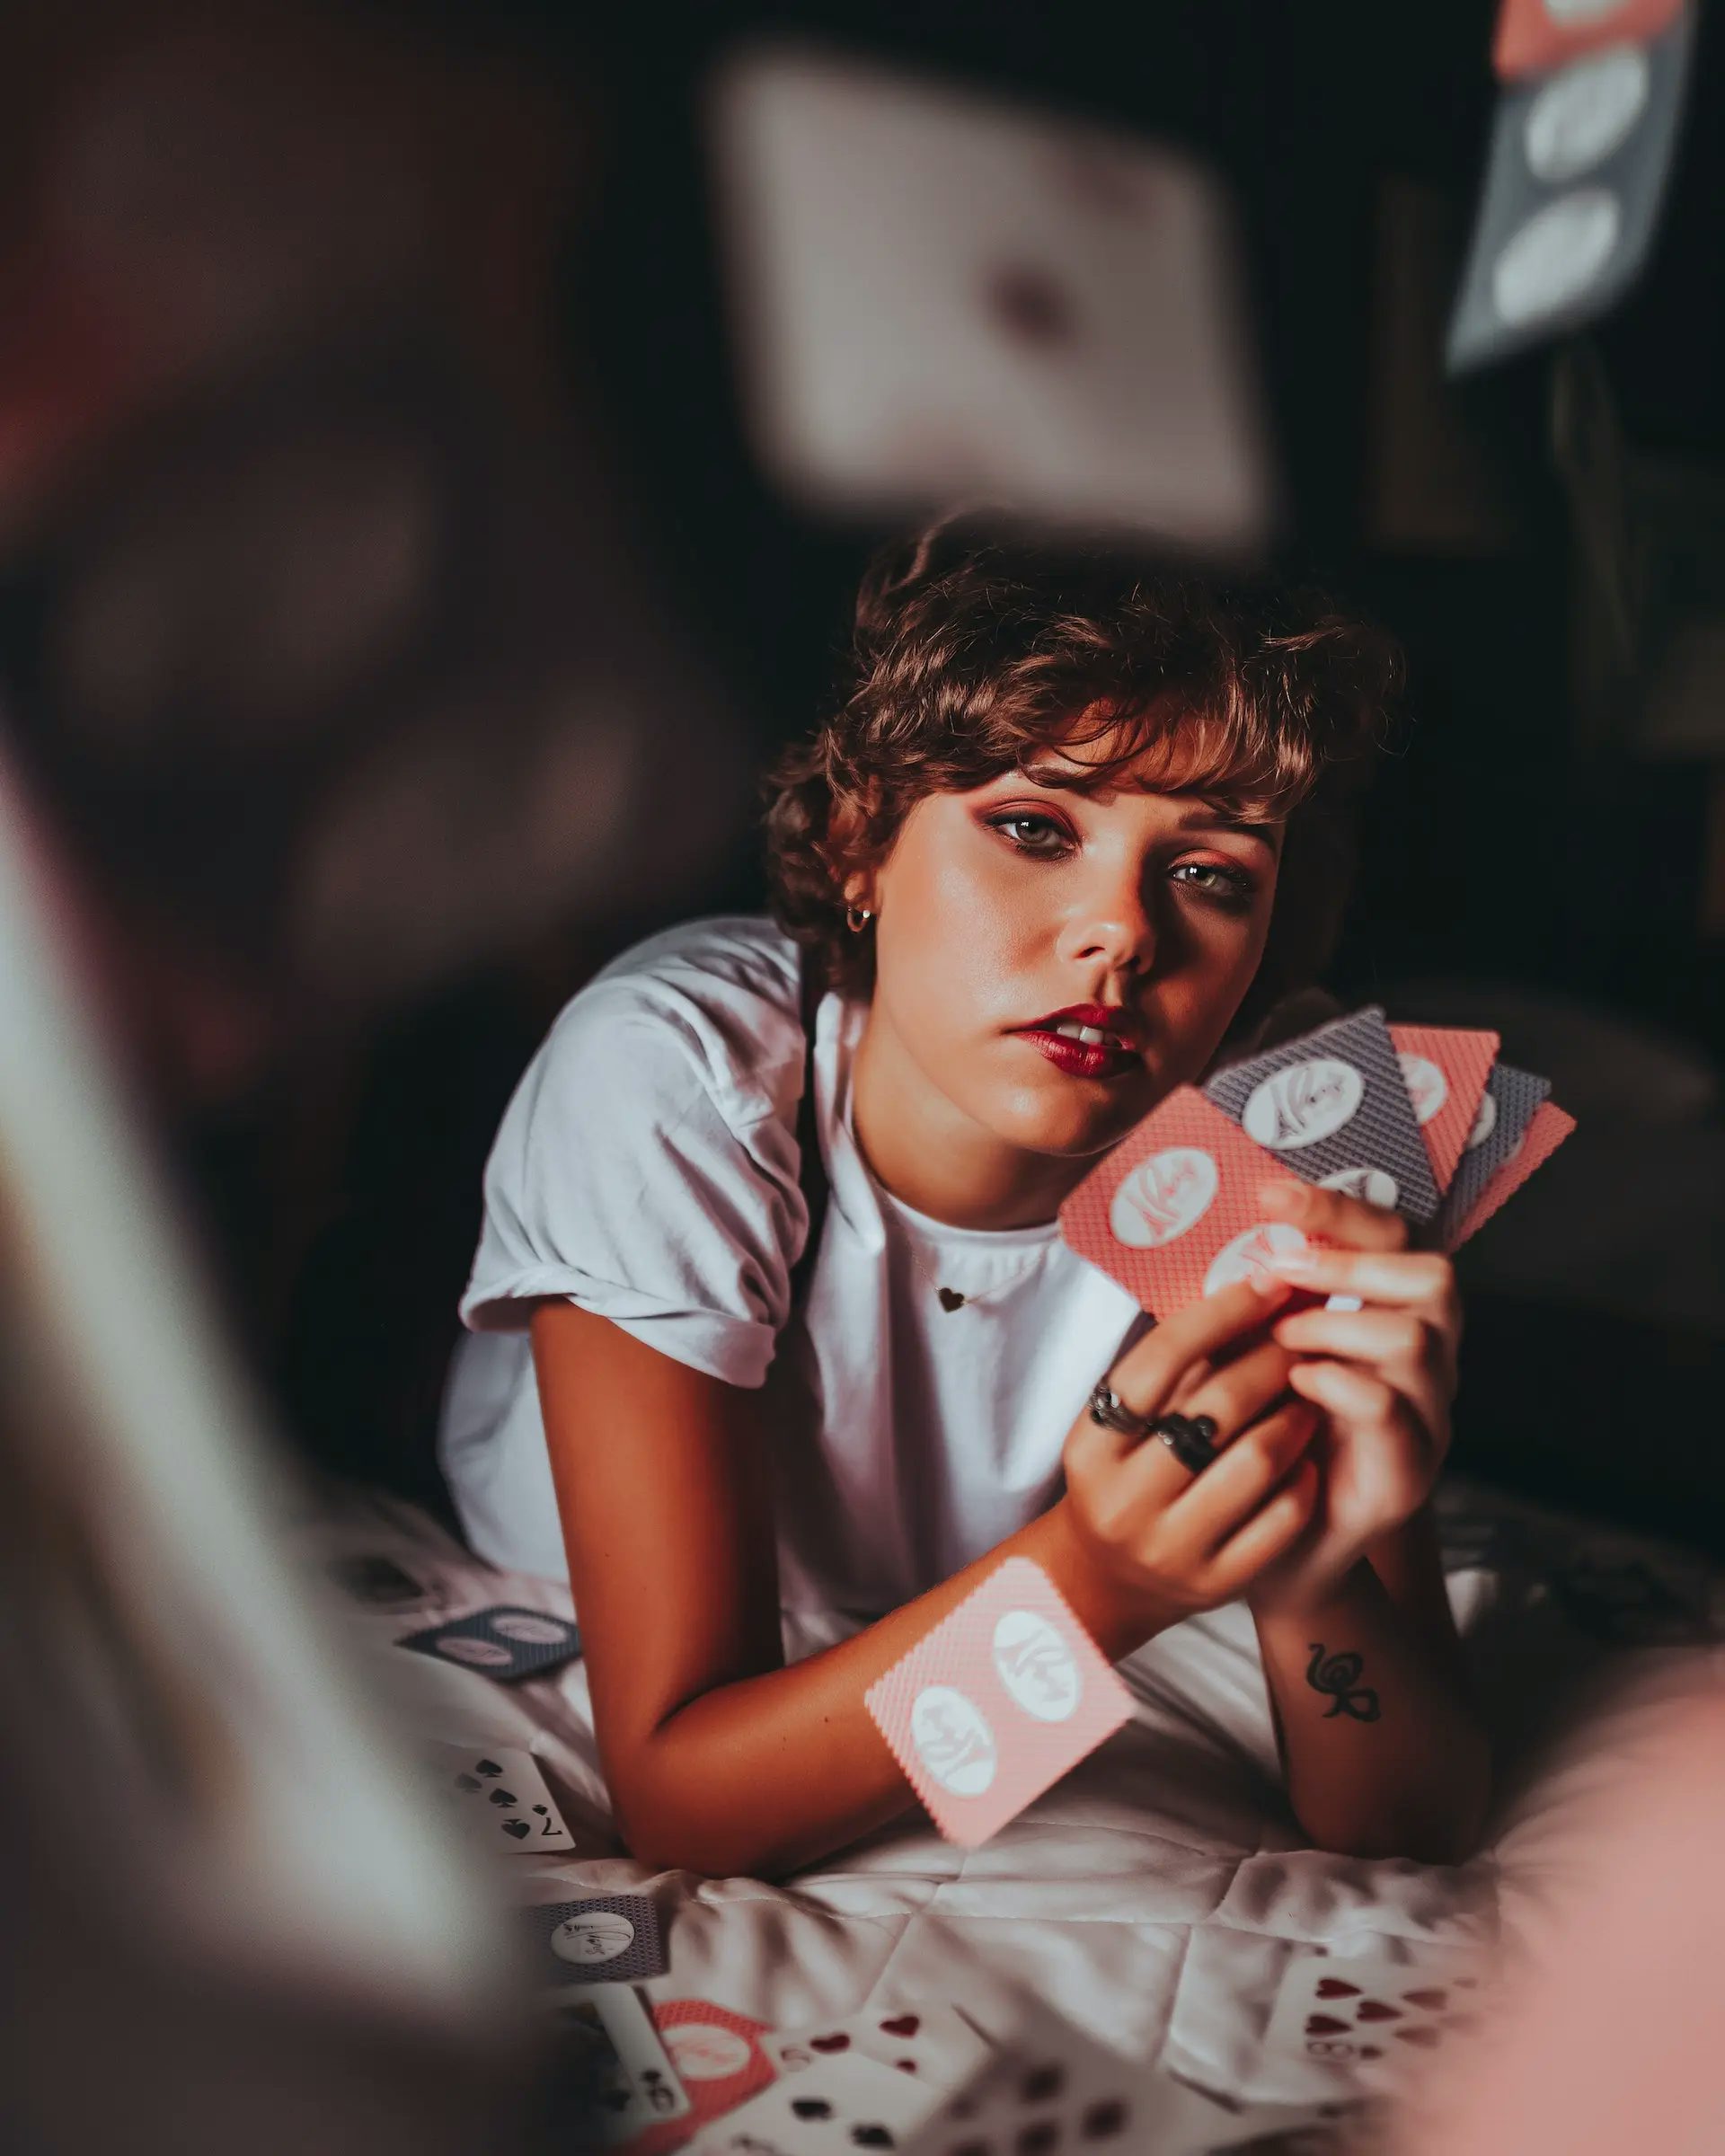 Date night cards, Photo by Matheus Bertelli: https://www.pexels.com/photo/woman-holding-red-and-black-cards-2044472/